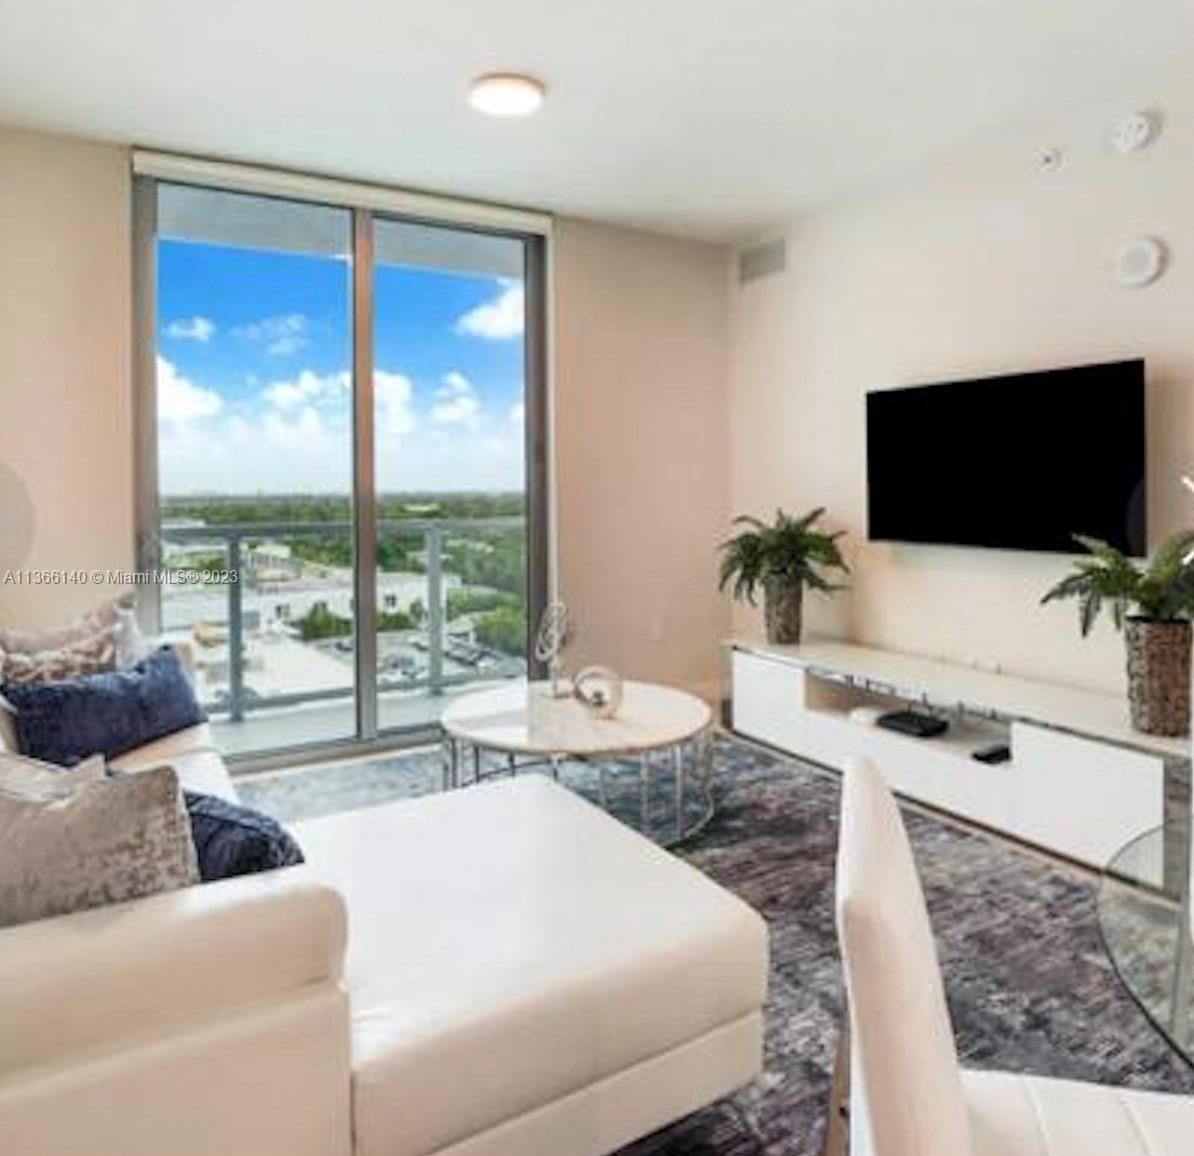 LOCATION! AMPLE 2Bed/2Bath CONDO in QUADRO CONDO IN THE HEART Of DESIGN DISTRICT. FULLY FURNISHED. WALKING DISTANCE TO SHOPPES, HIGH END RETAIL STORES, TRENDY RESTAURANTES AND ENTERTAINMENT. INSTRUCTIONS AT BROKERS REMARKS.